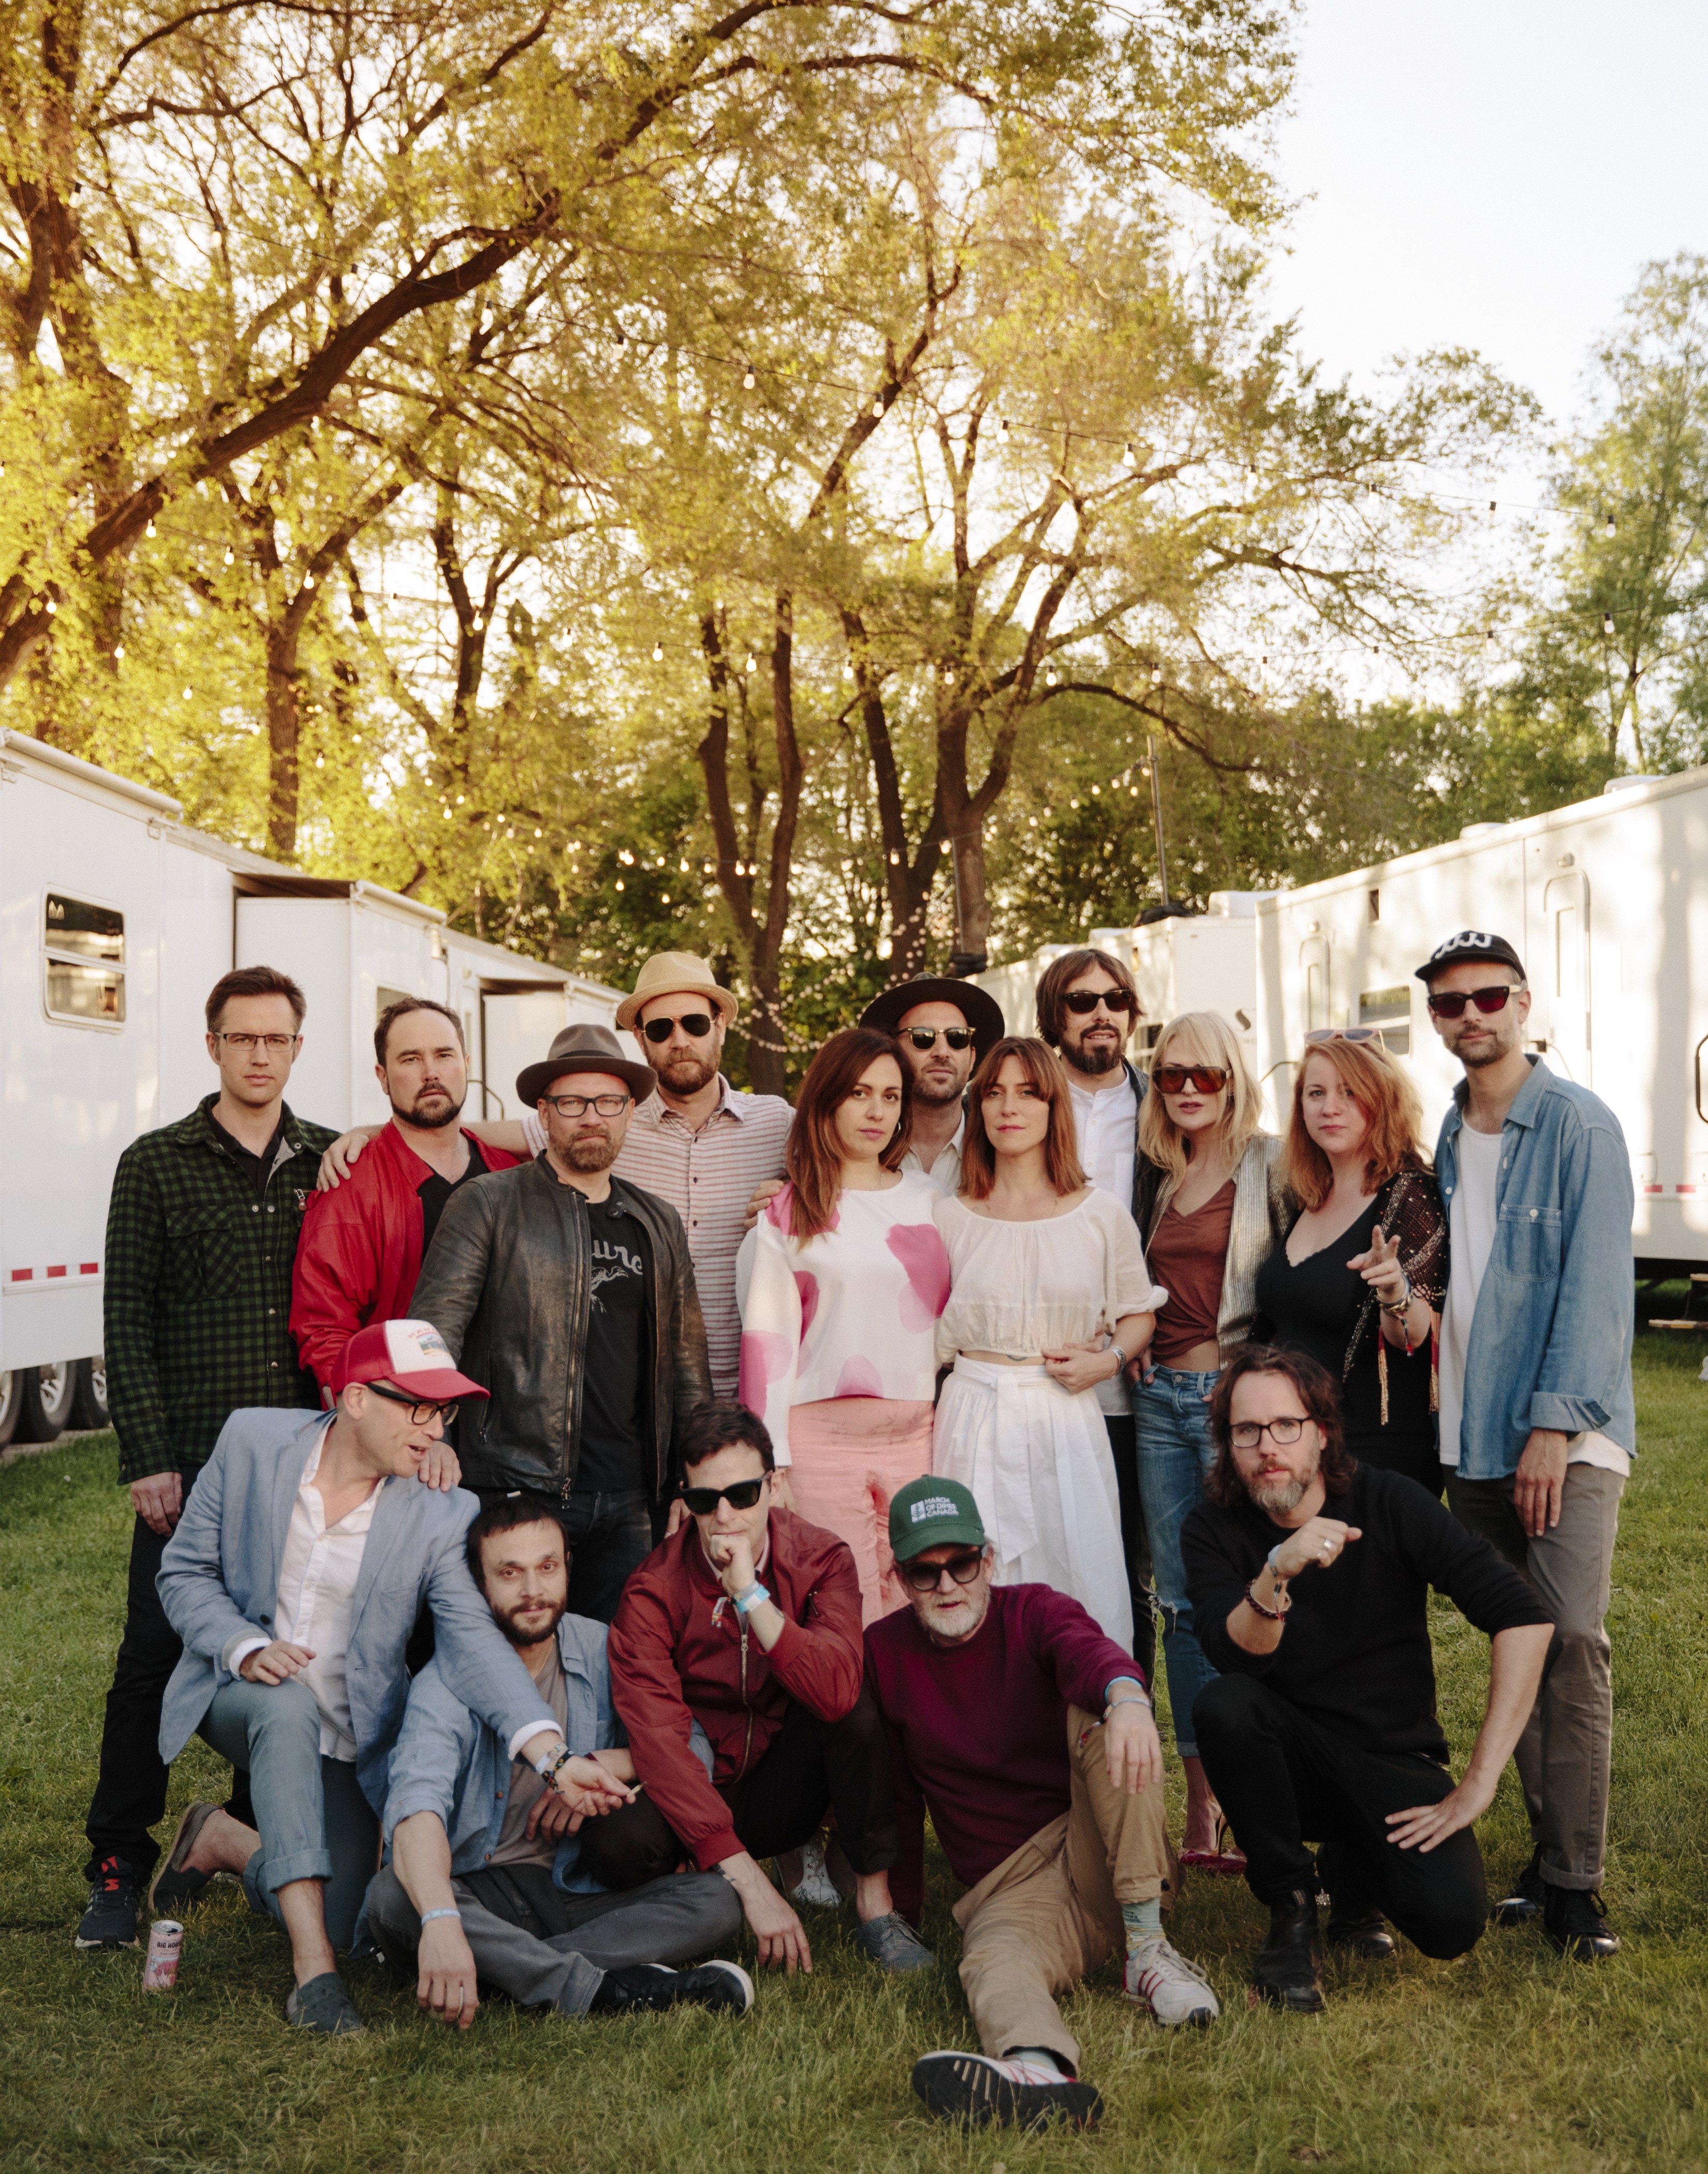 16 people stand on grass on a summery day; five sit or kneel, while 11 stand behind in a variety of poses, all looking at the camera. A mix of men and women, they are informally dressed. The group stands between two long rows of white trailers. 